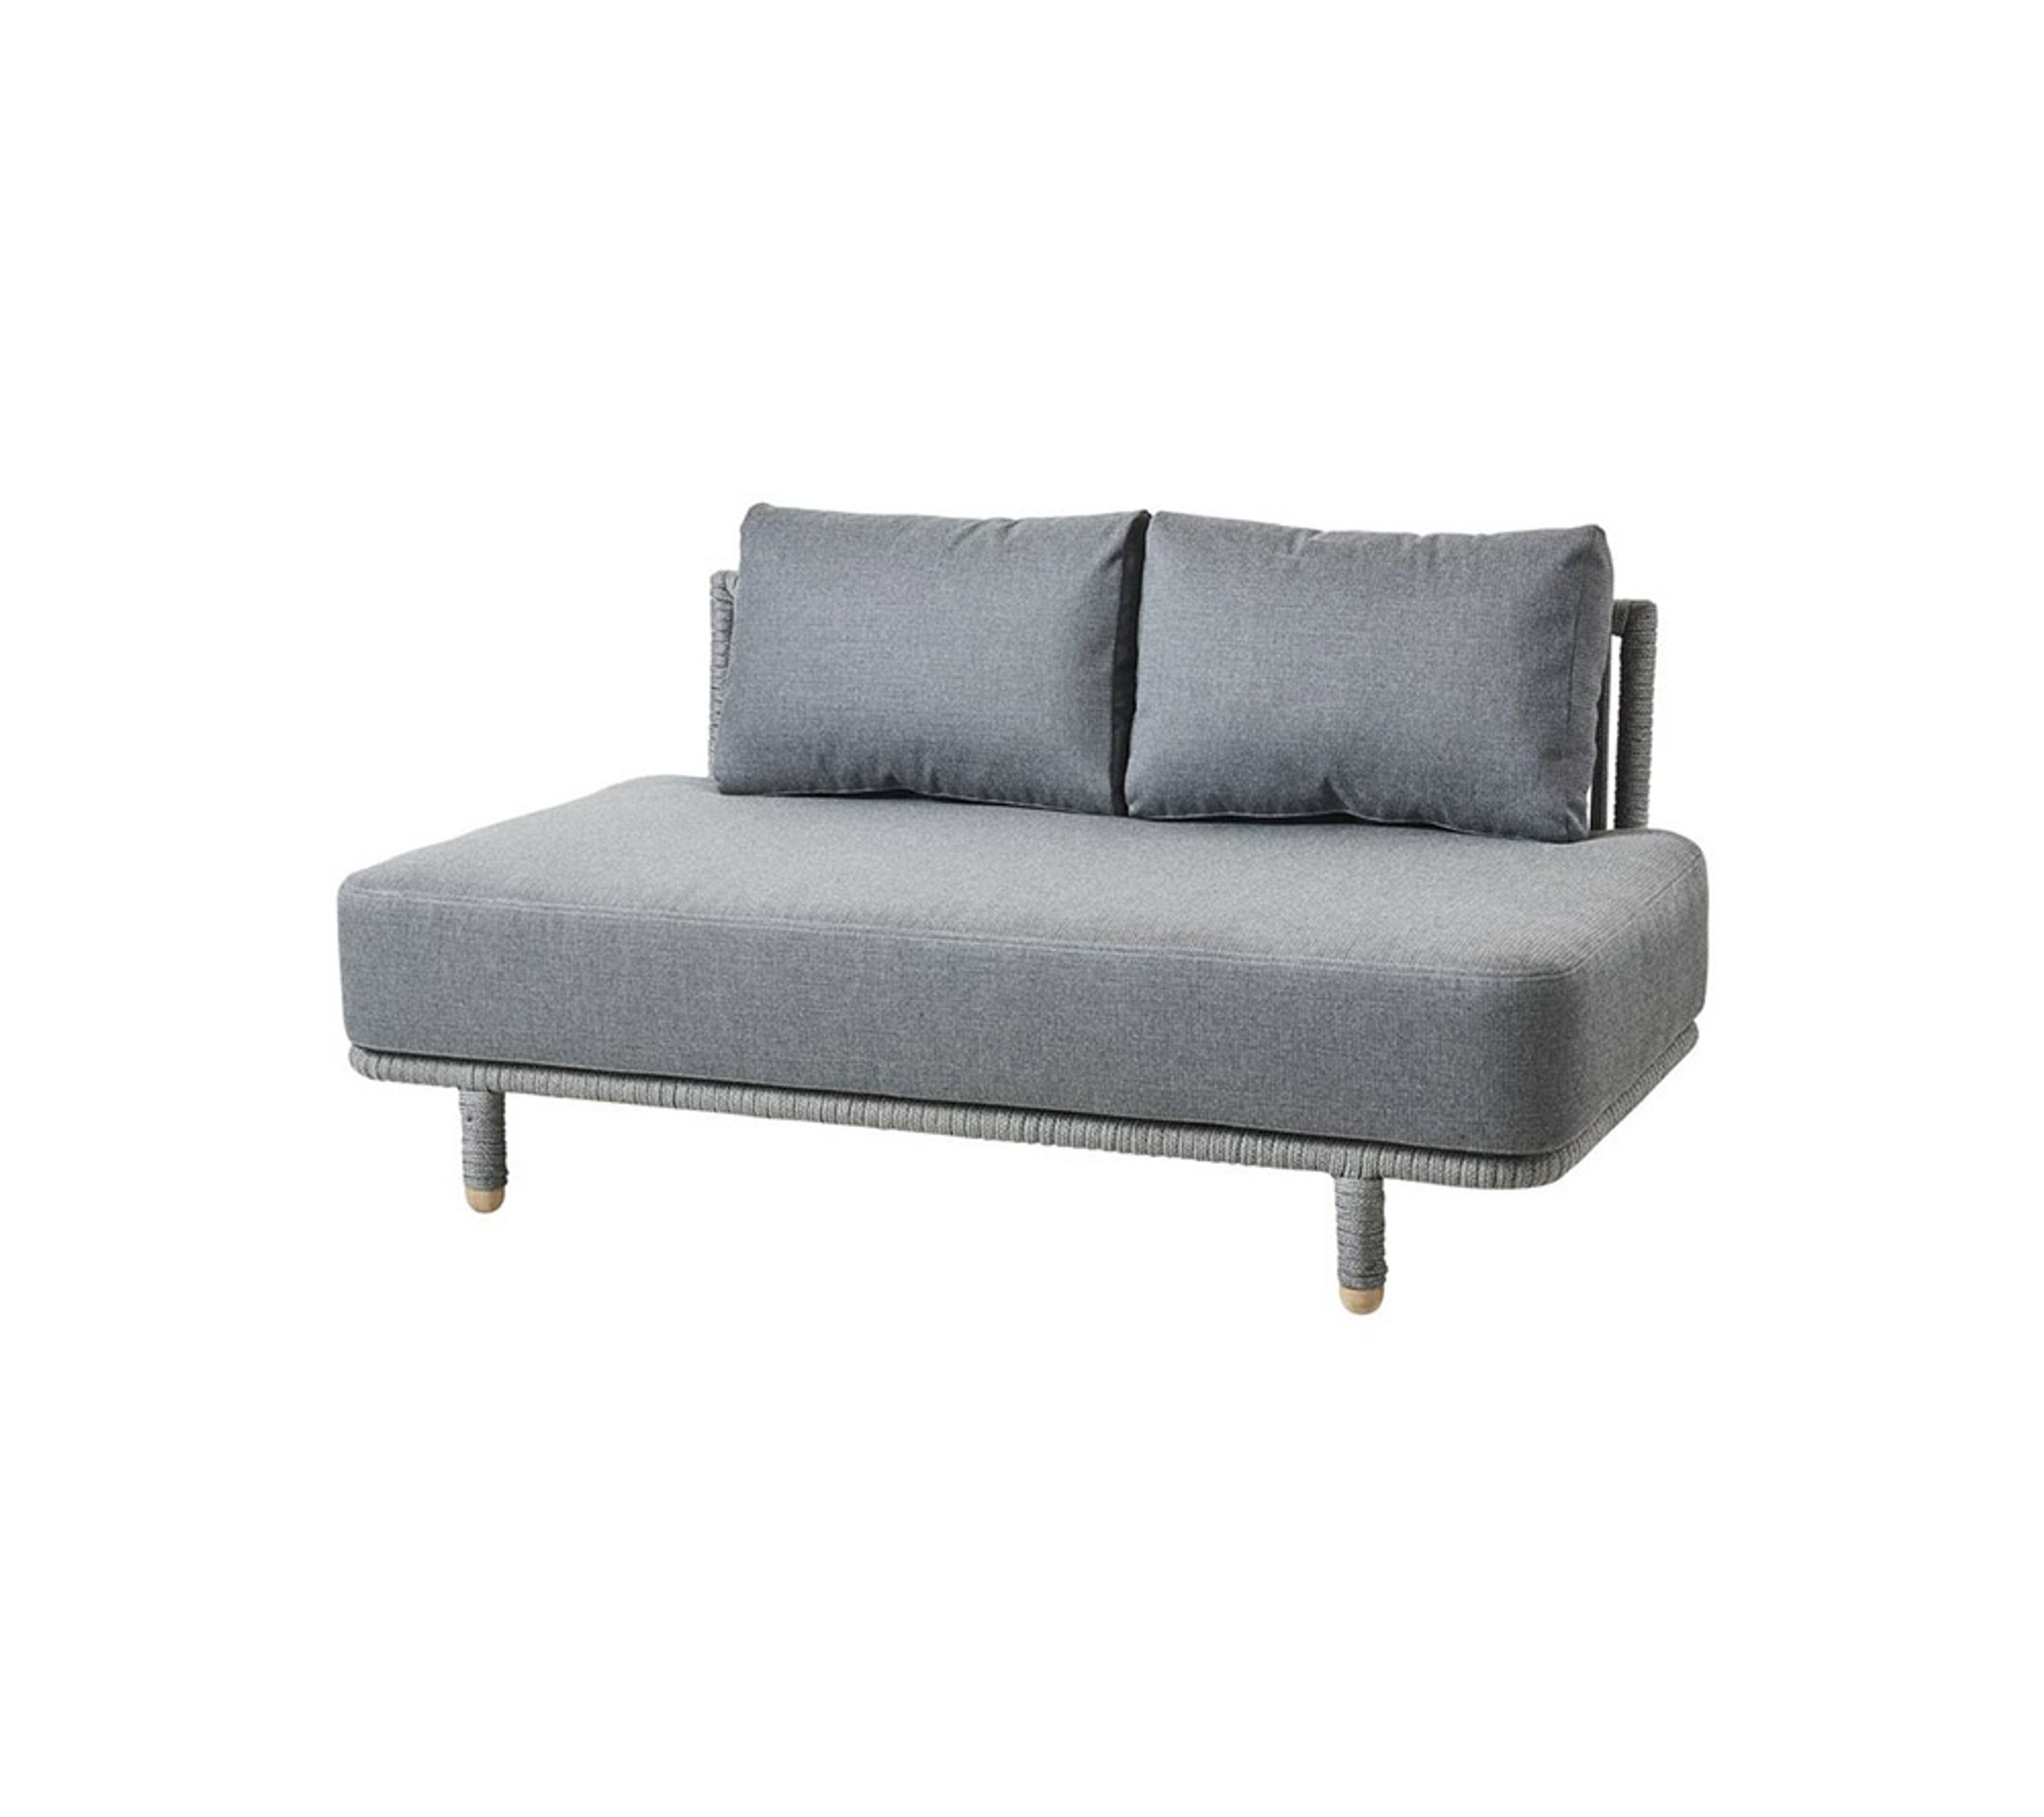 Moments 2 Seater Sofa Module - Couch - Cane-line